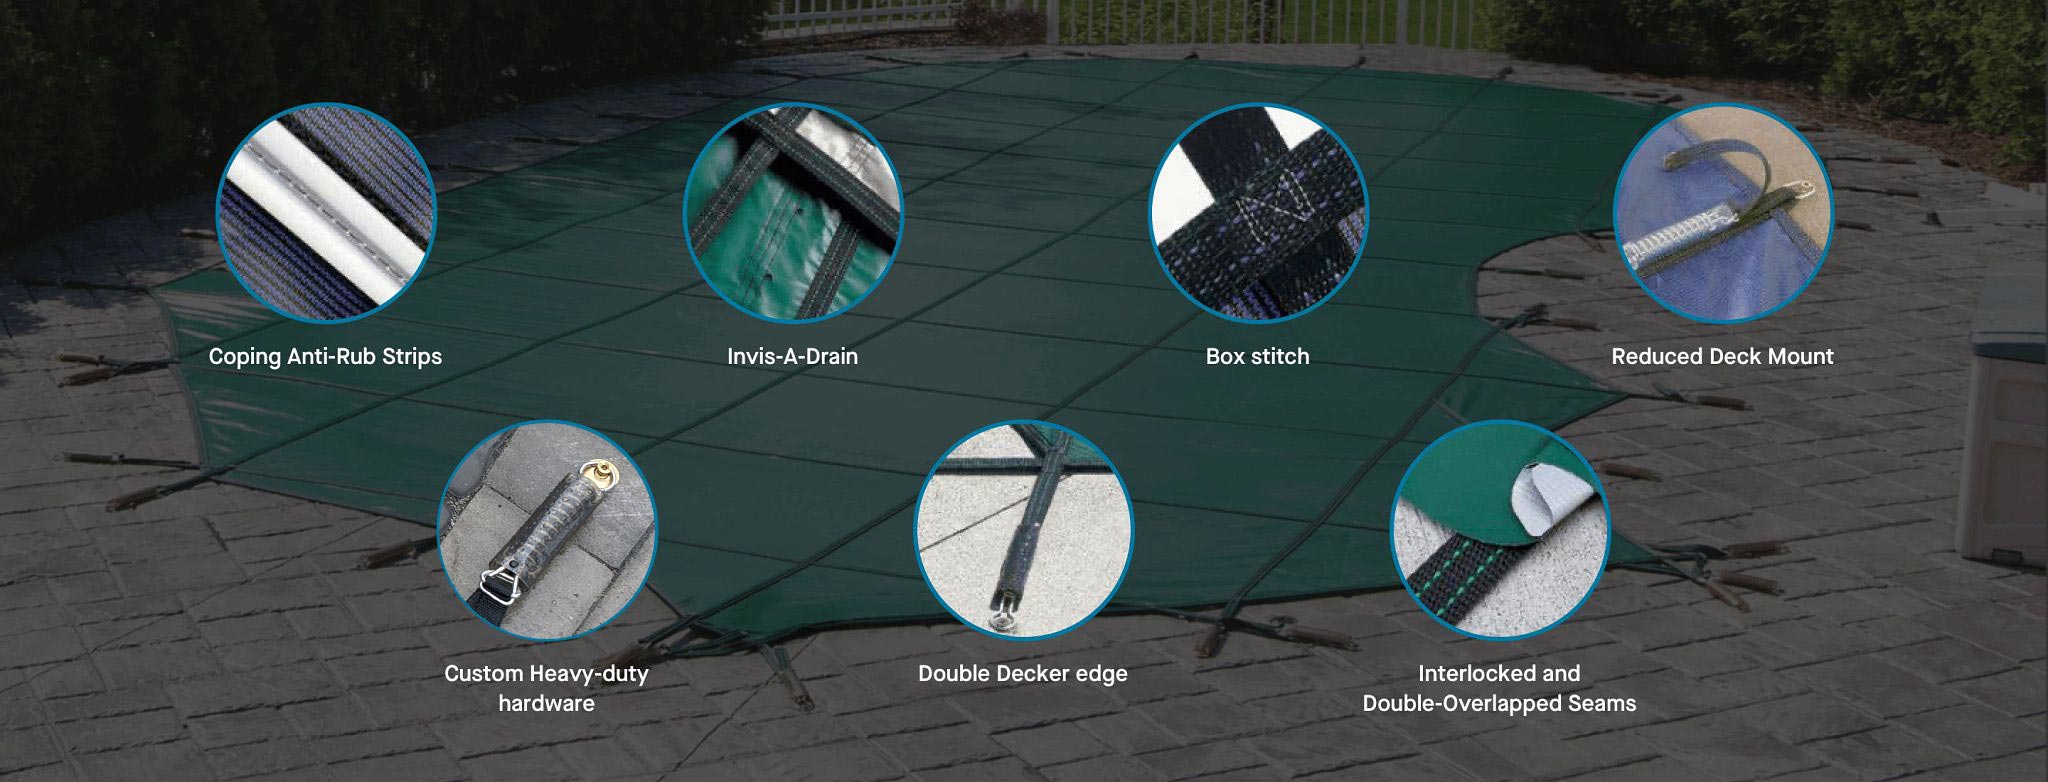 4 Tips on Preparing Your Automatic Pool Cover for Winter 